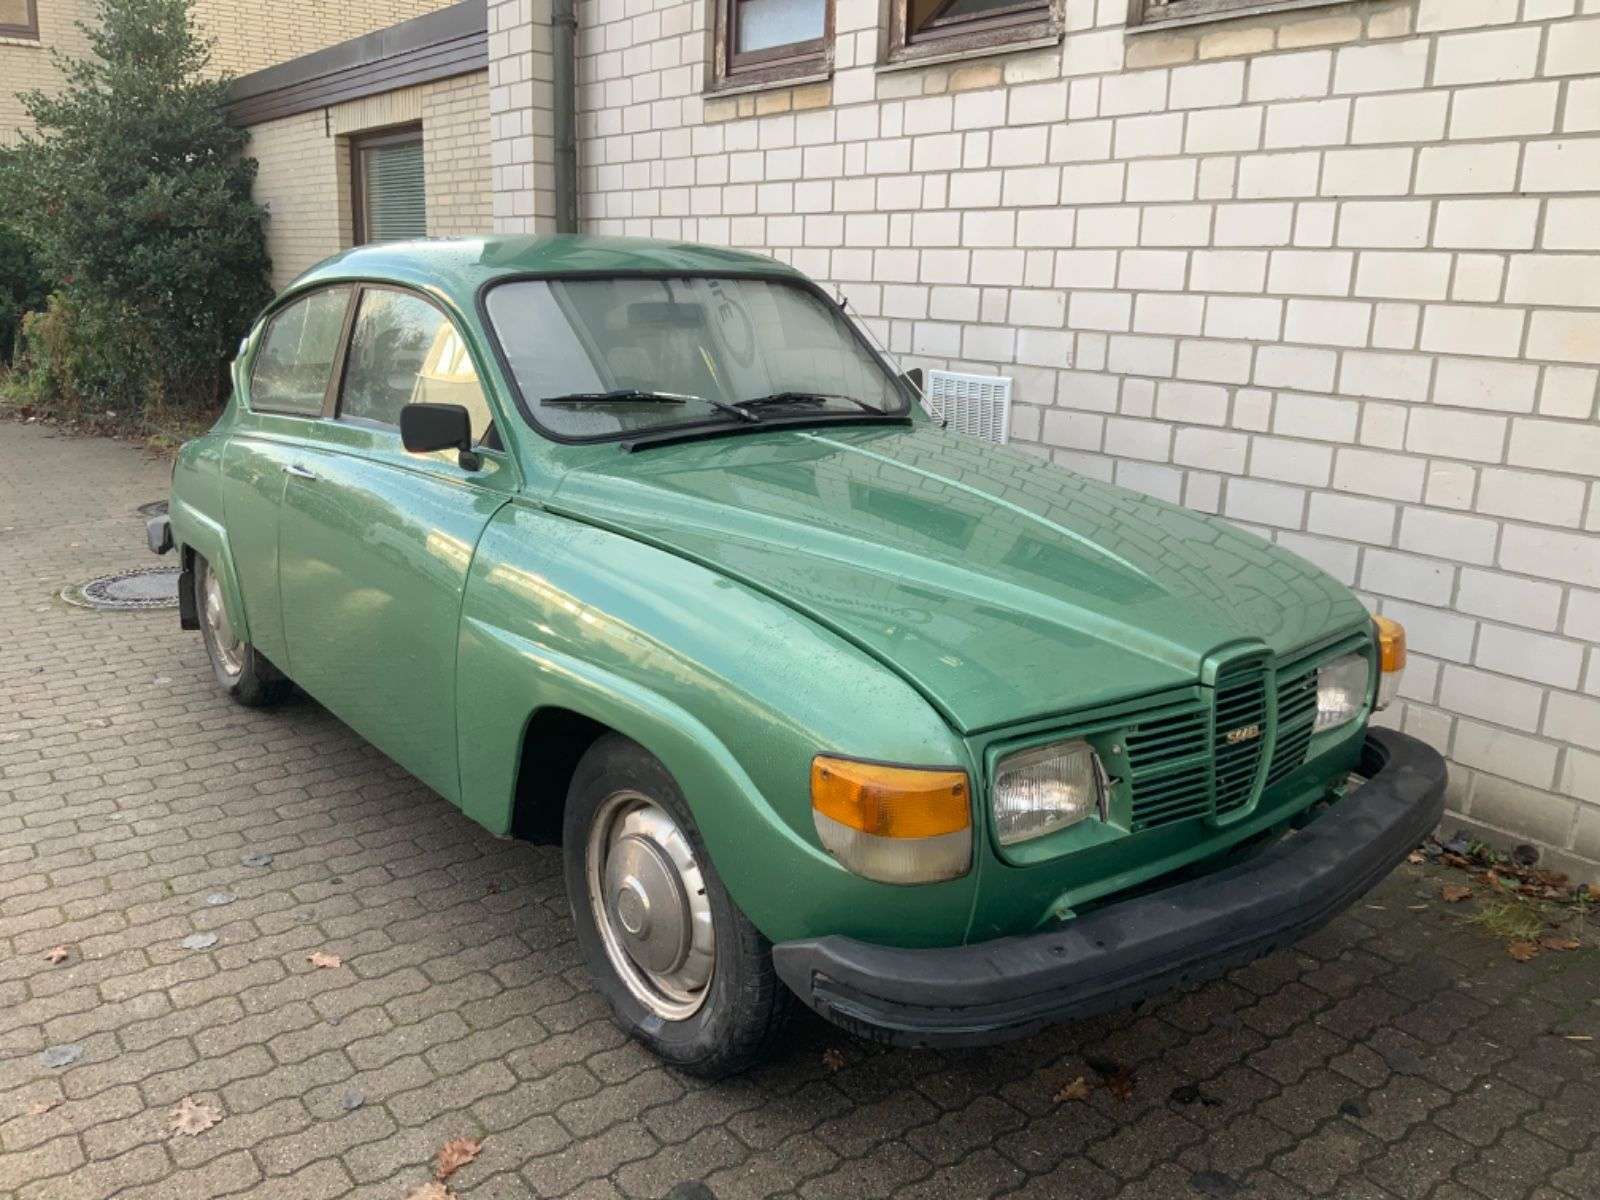 Saab 96 Coupe in Green used in Rellingen for € 3,500.-